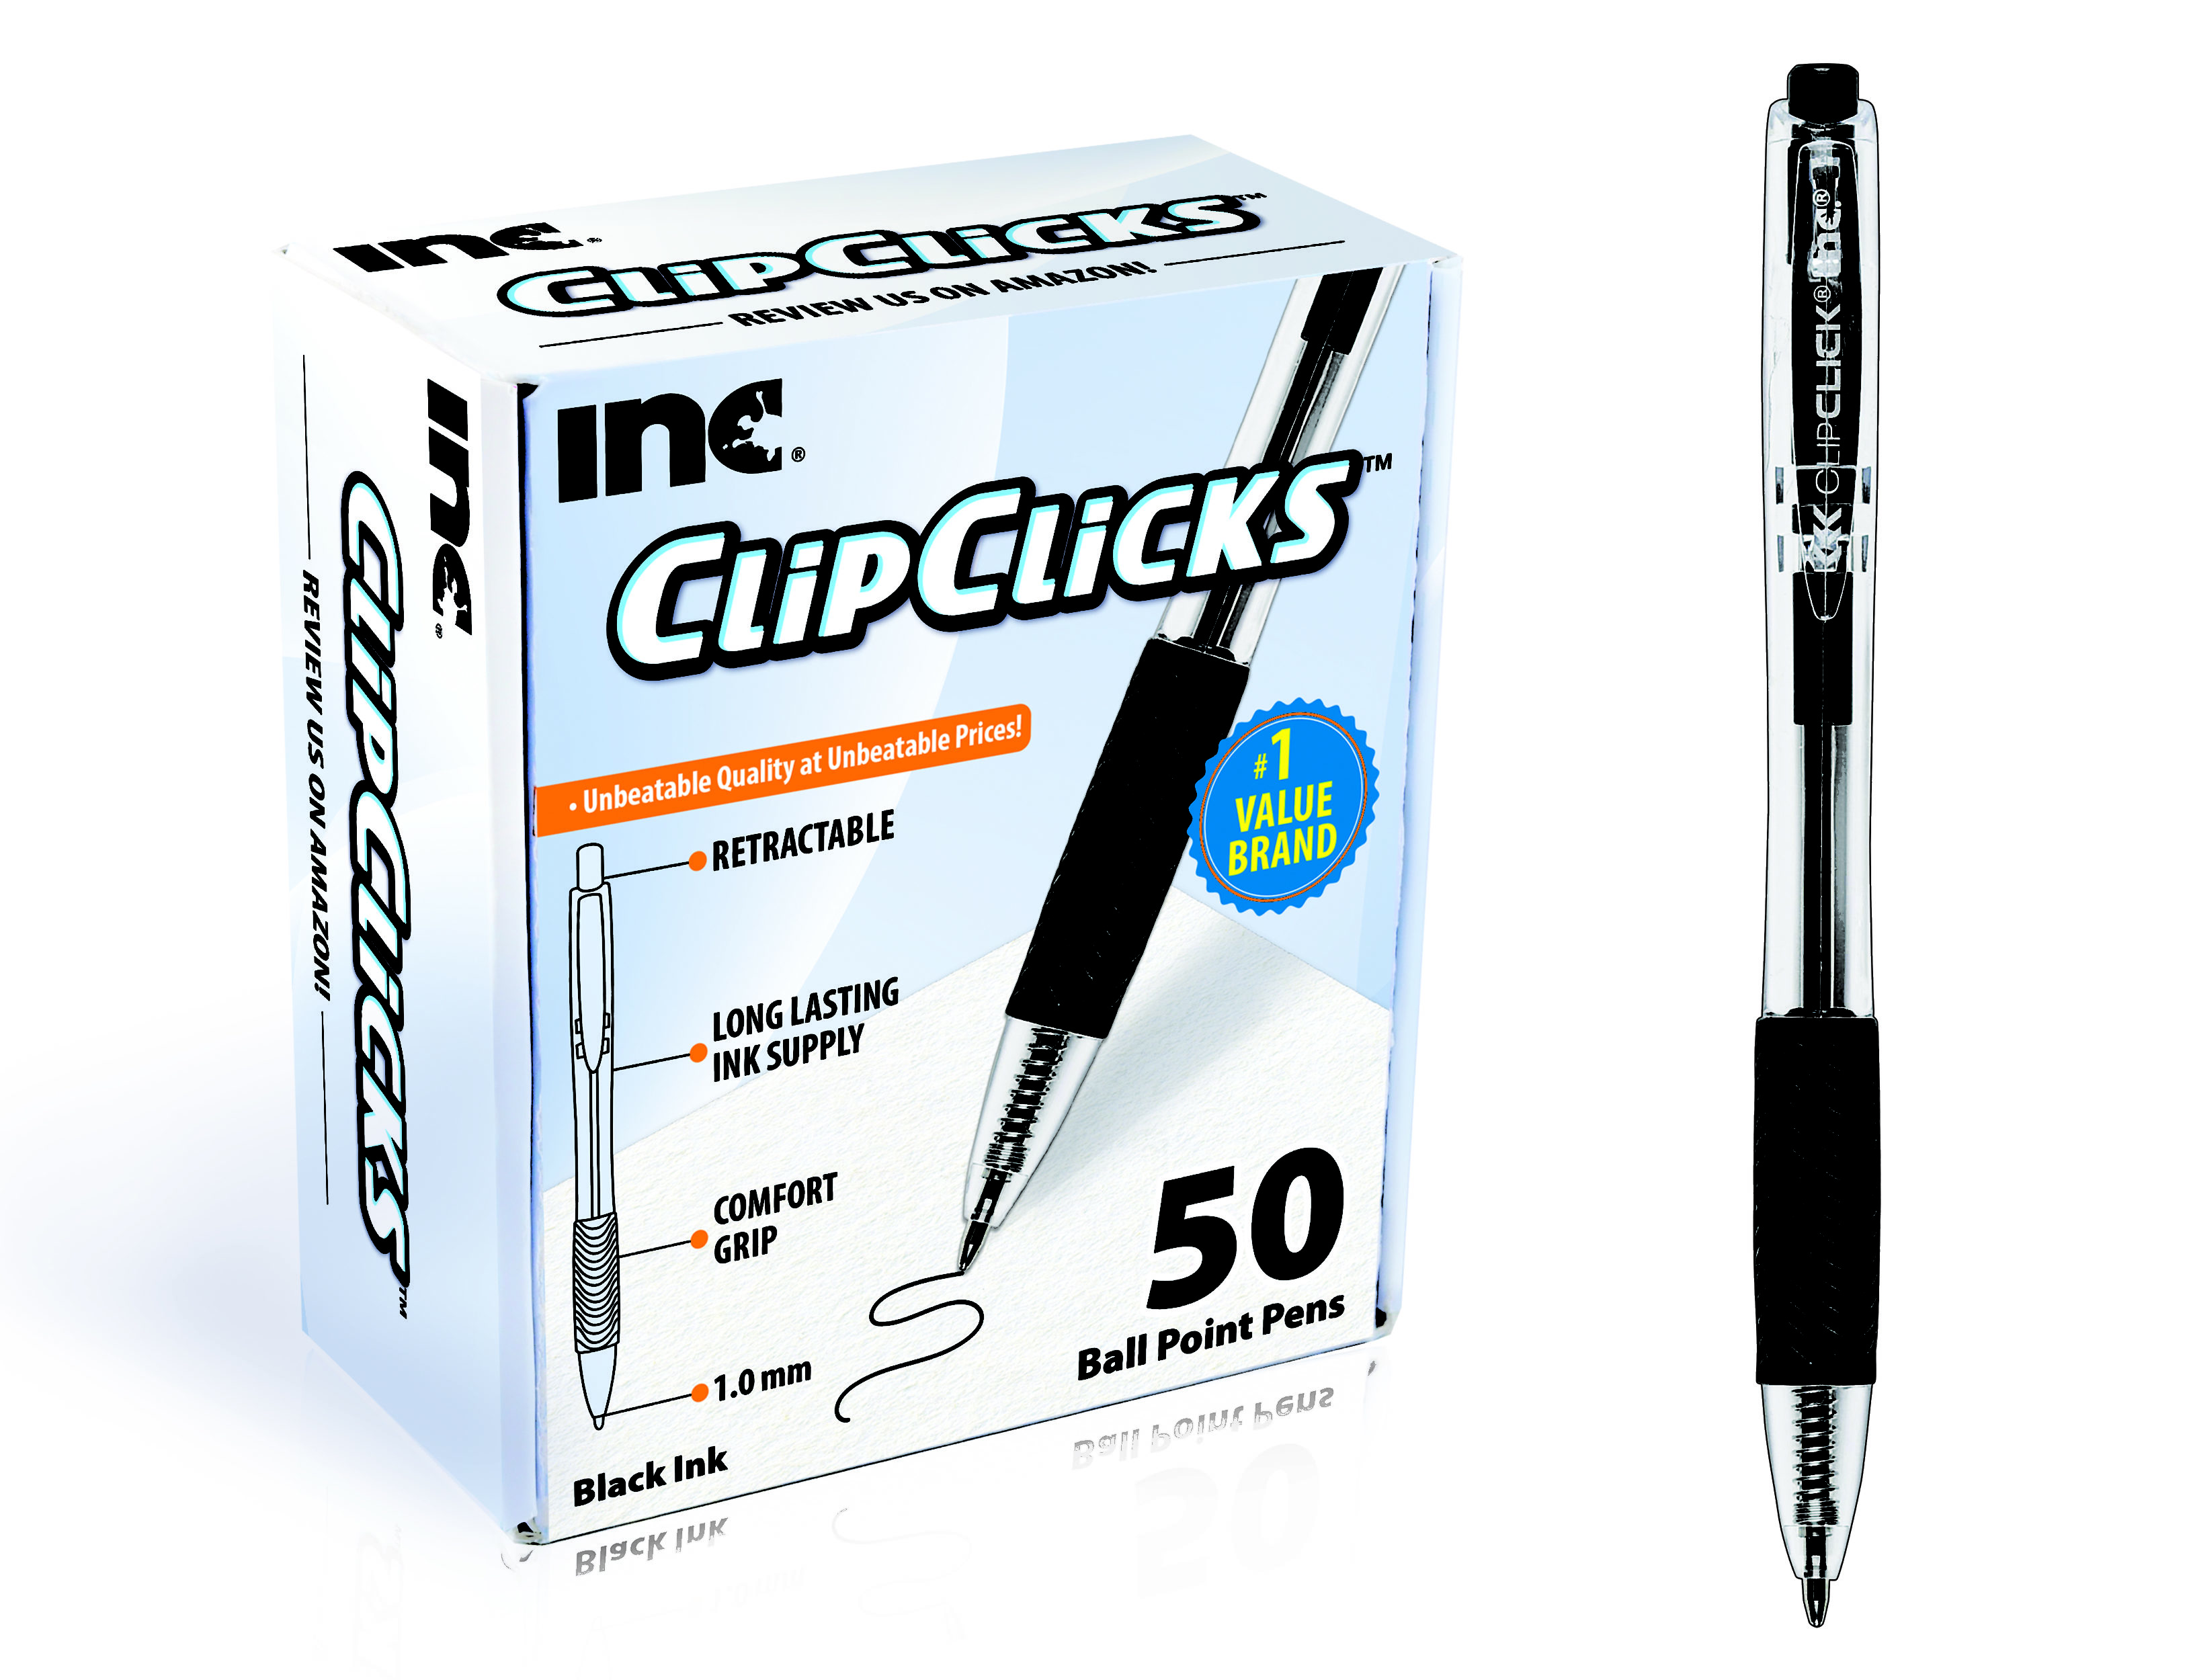 Inc Writing Instruments – Pens – Peachtree Playthings